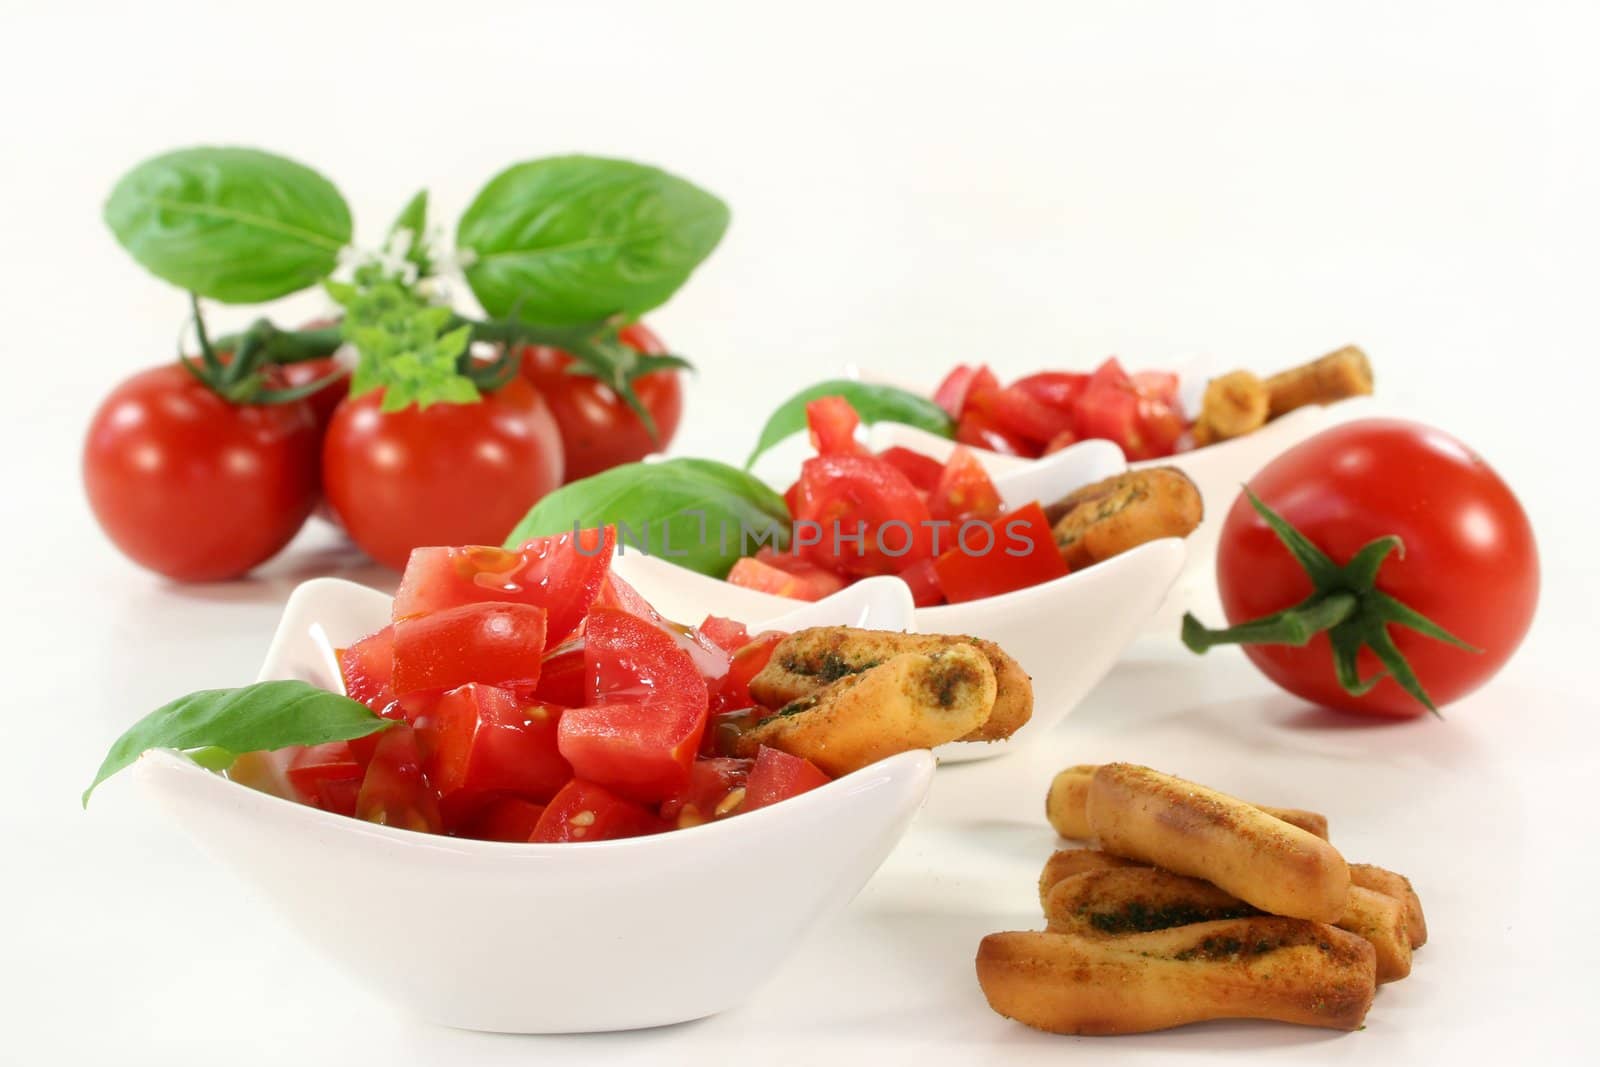 some bread sticks, tomatoes and basil on a light background
